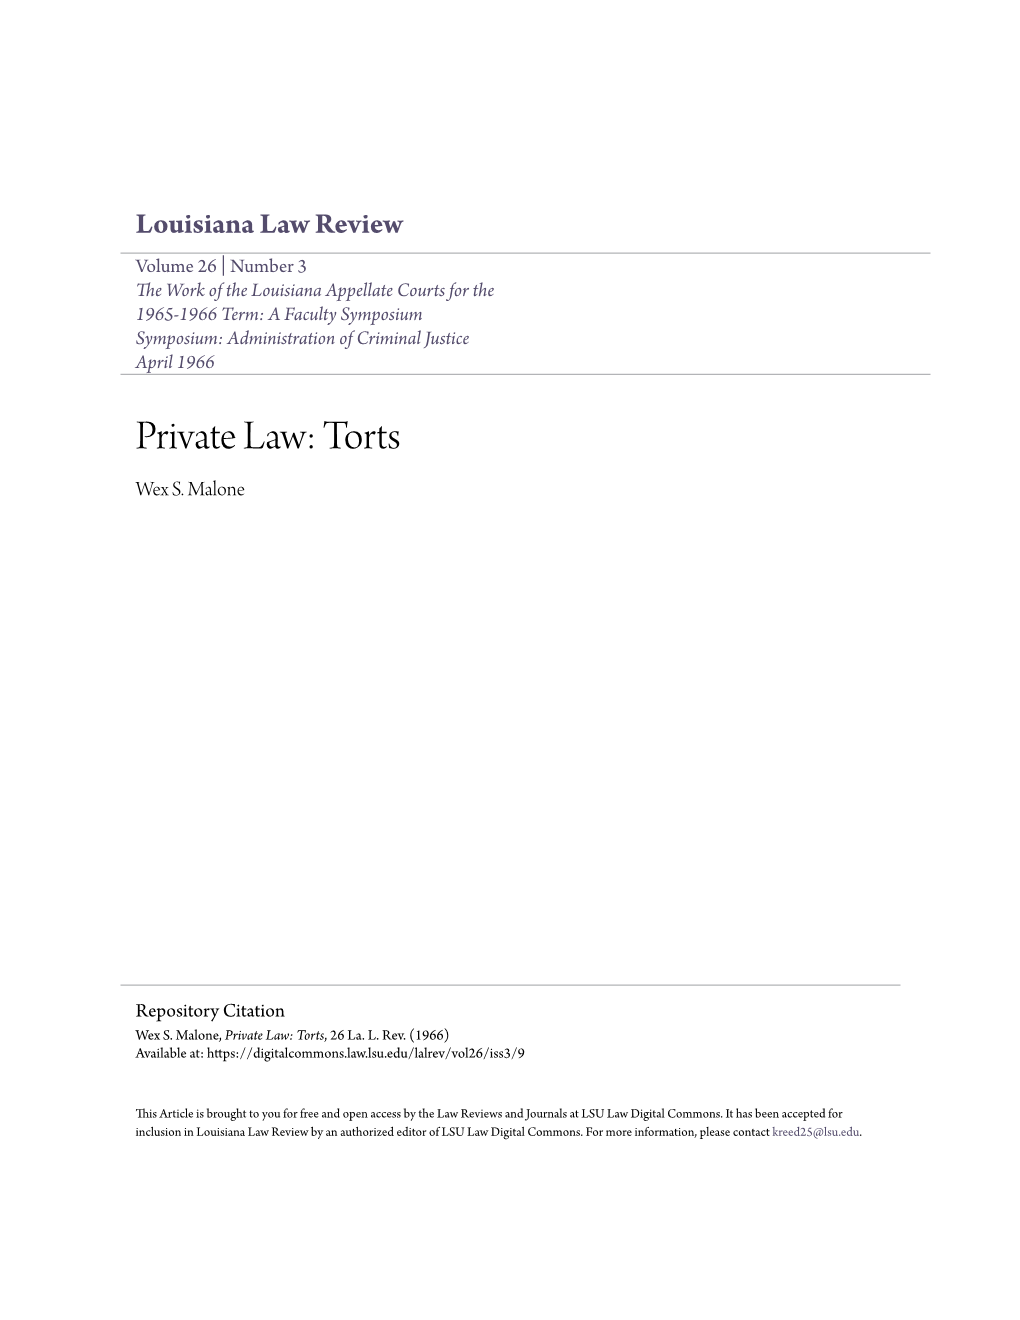 Private Law: Torts Wex S